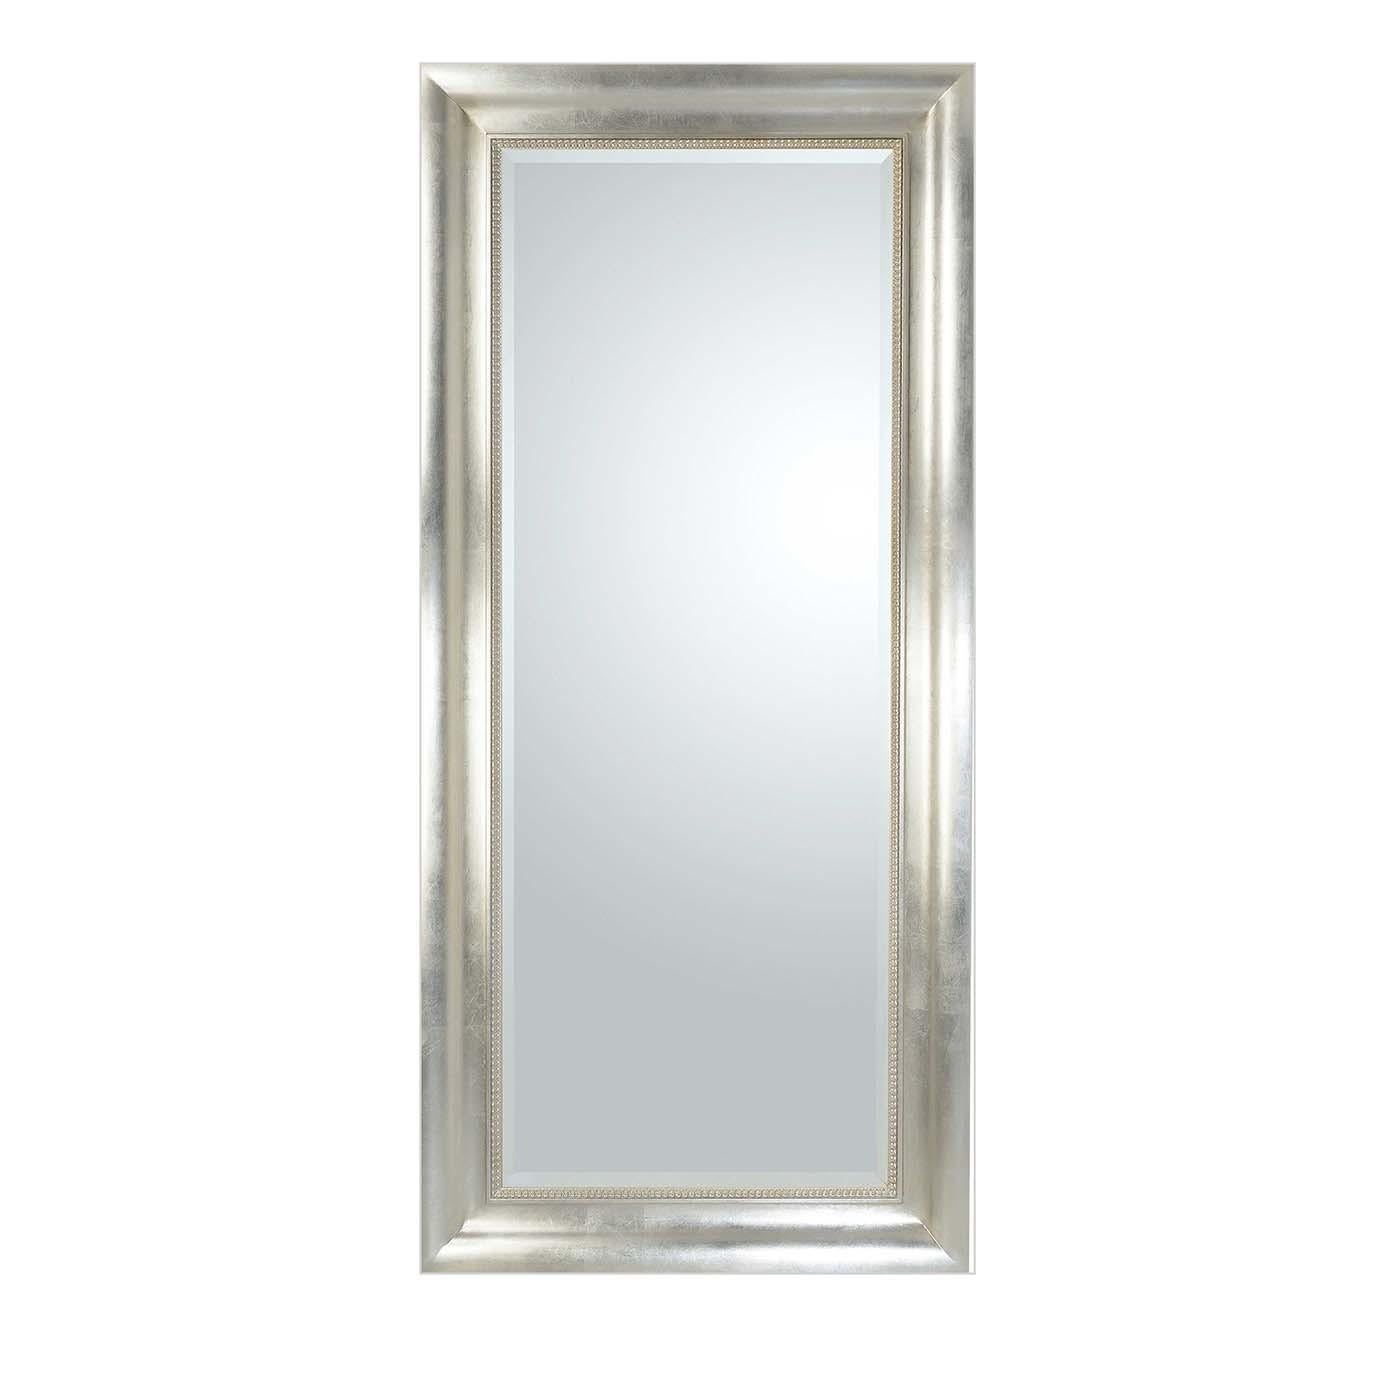 Distinguished by the antiqued champagne-colored silver-leaf coating adorning the wood frame, this wall mirror exudes a timeless allure. The 13cm-wide frame is minutely finished by hand and encloses a rectangular beveled mirror in prized Italian